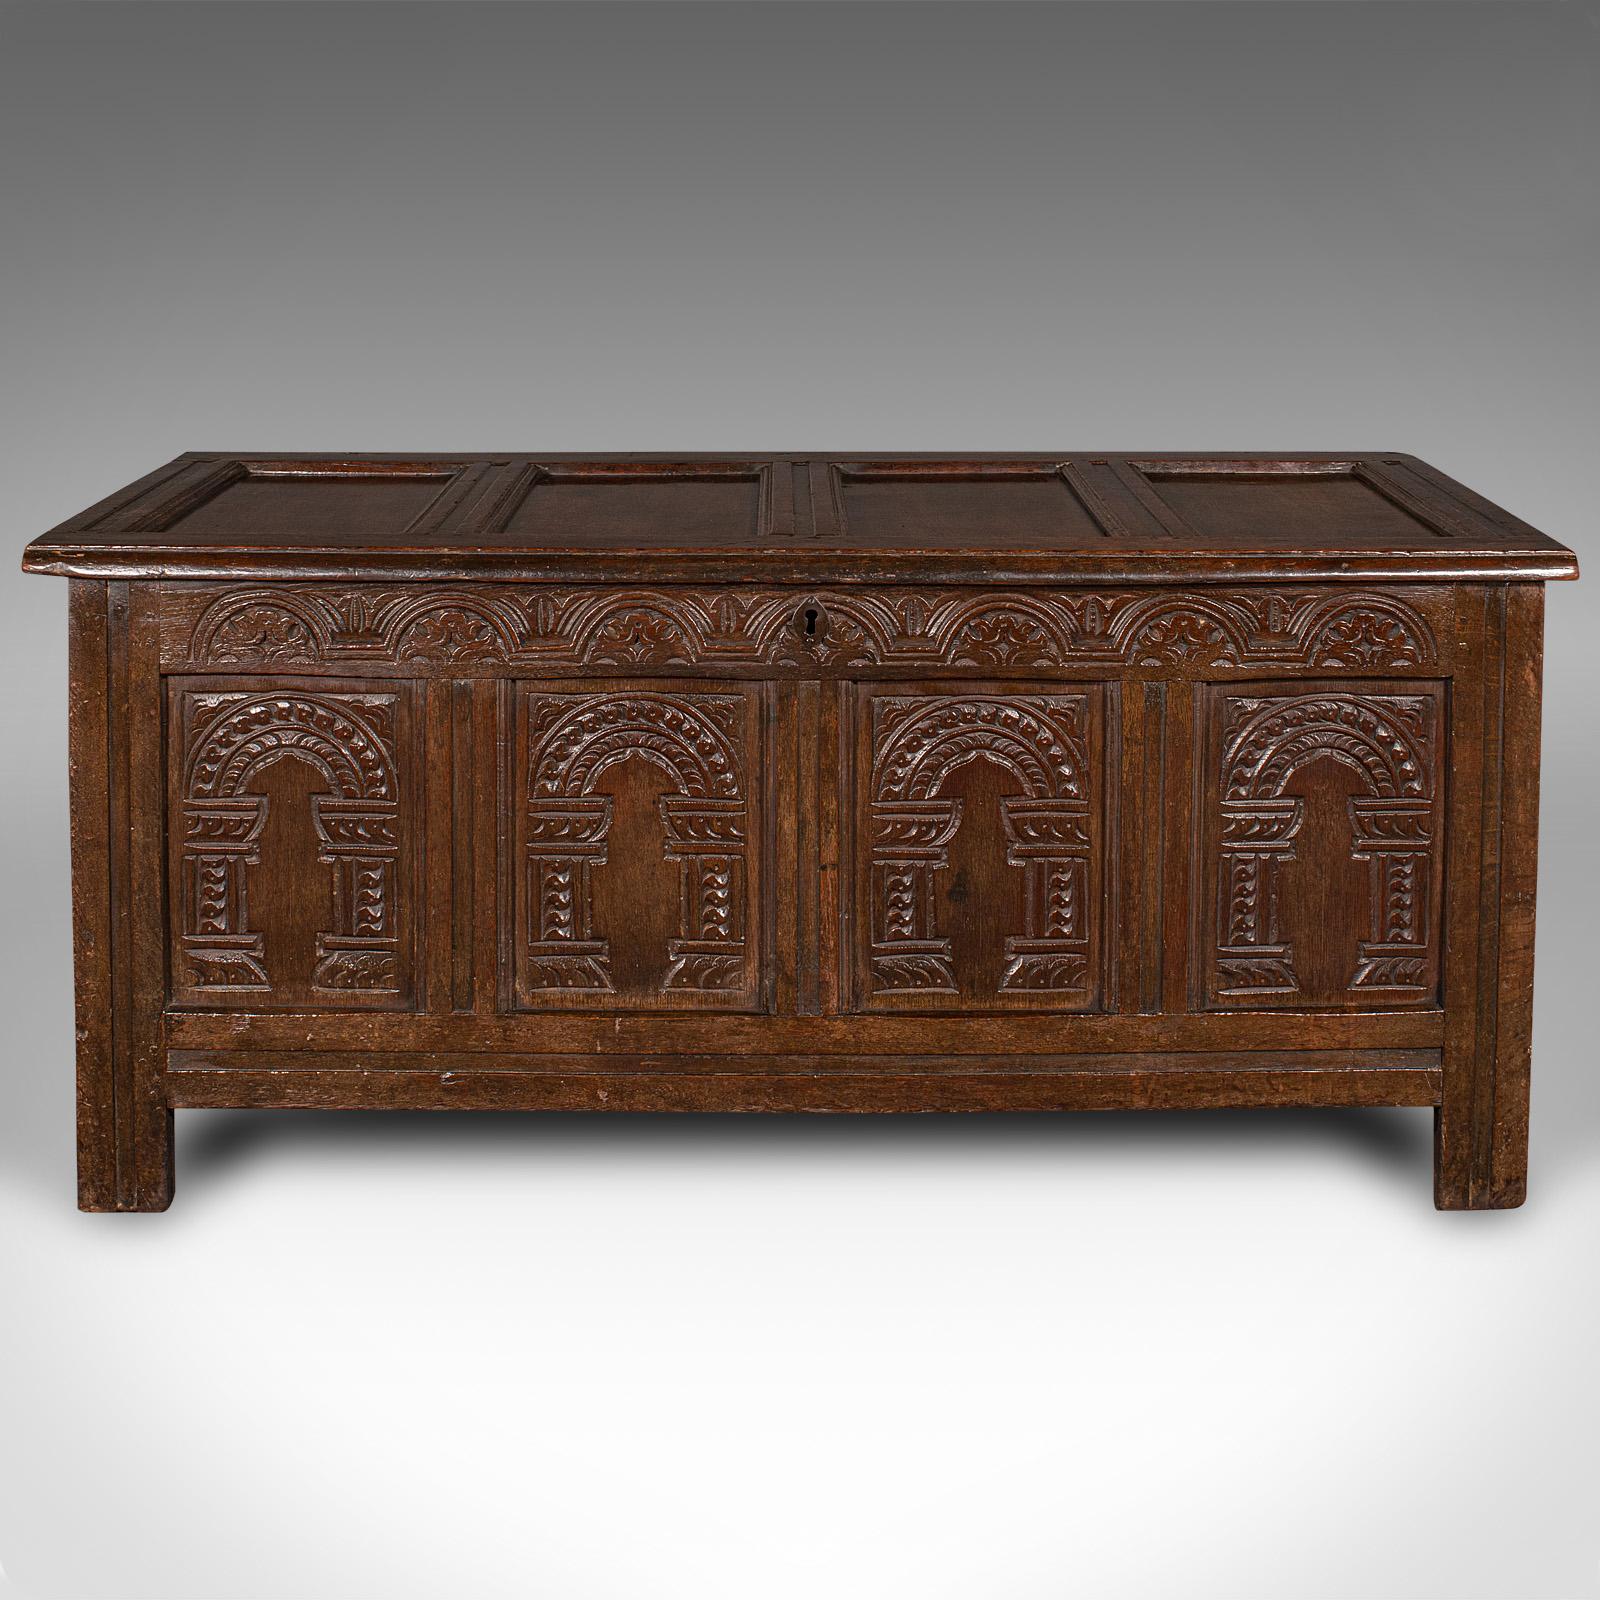 William and Mary Large Antique Coffer, English, Oak, Carved Trunk, Window Seat, William III, 1700 For Sale